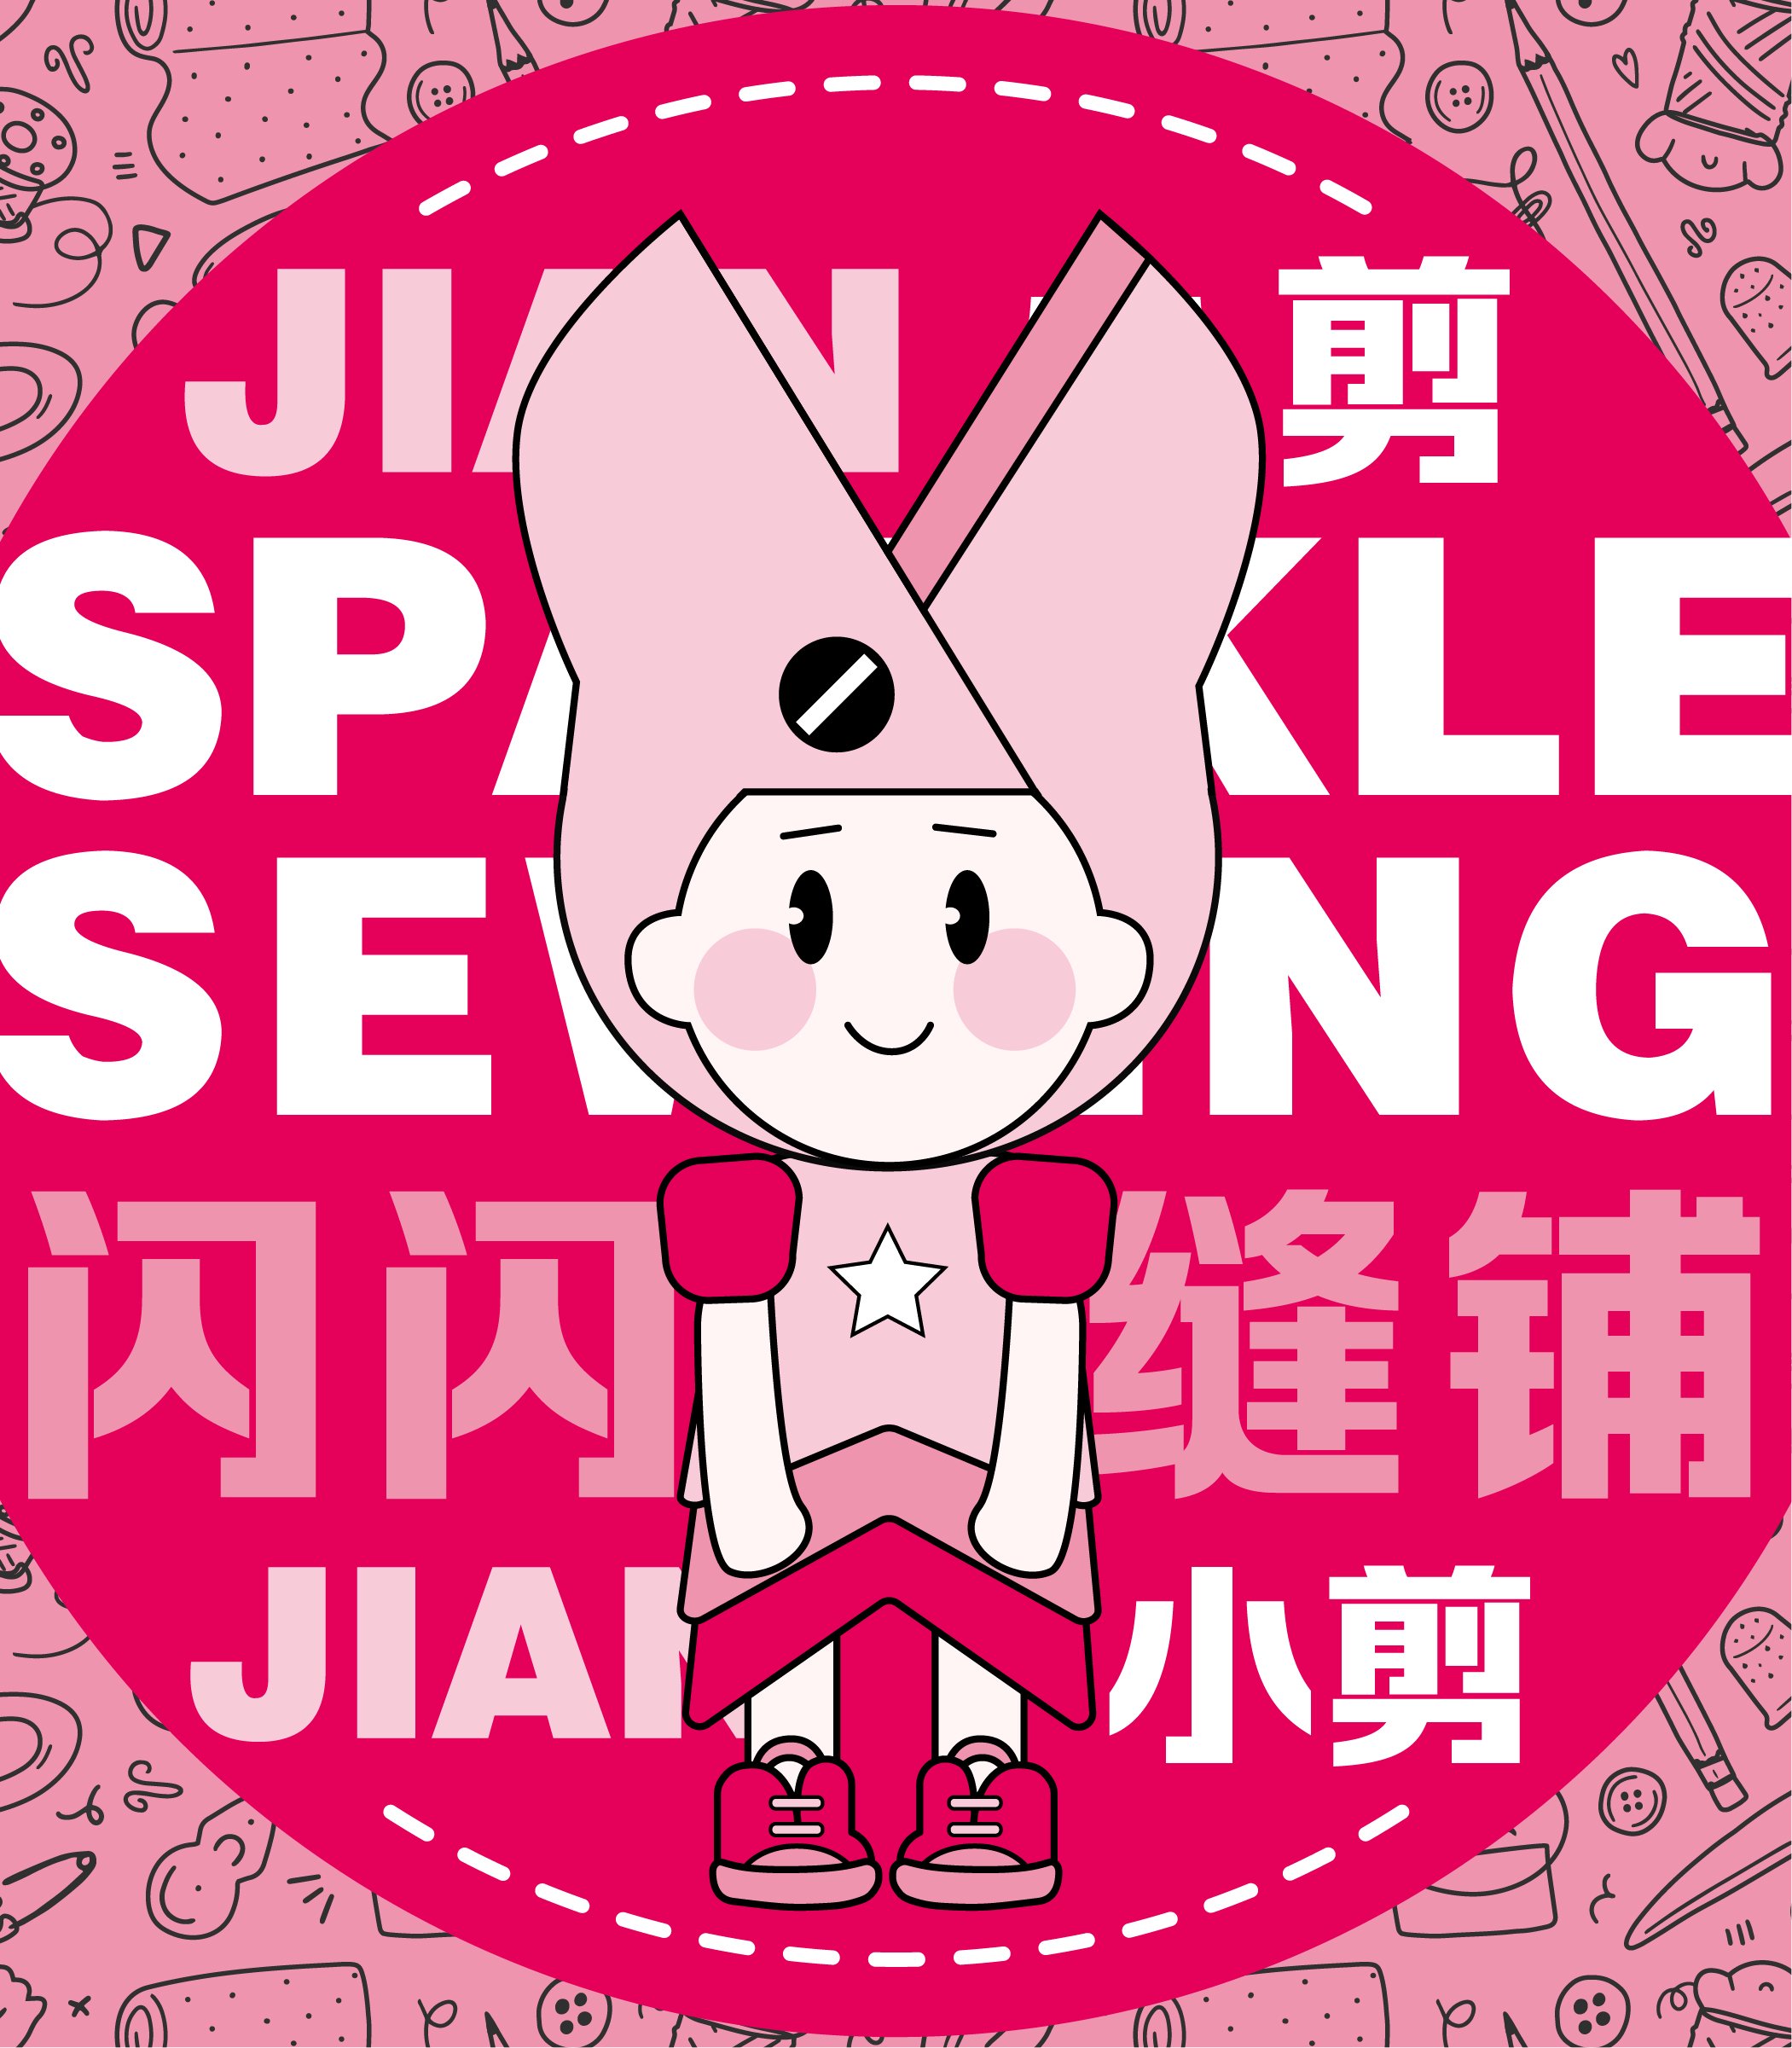 Sparkle Sewing Shop Character - JIAN